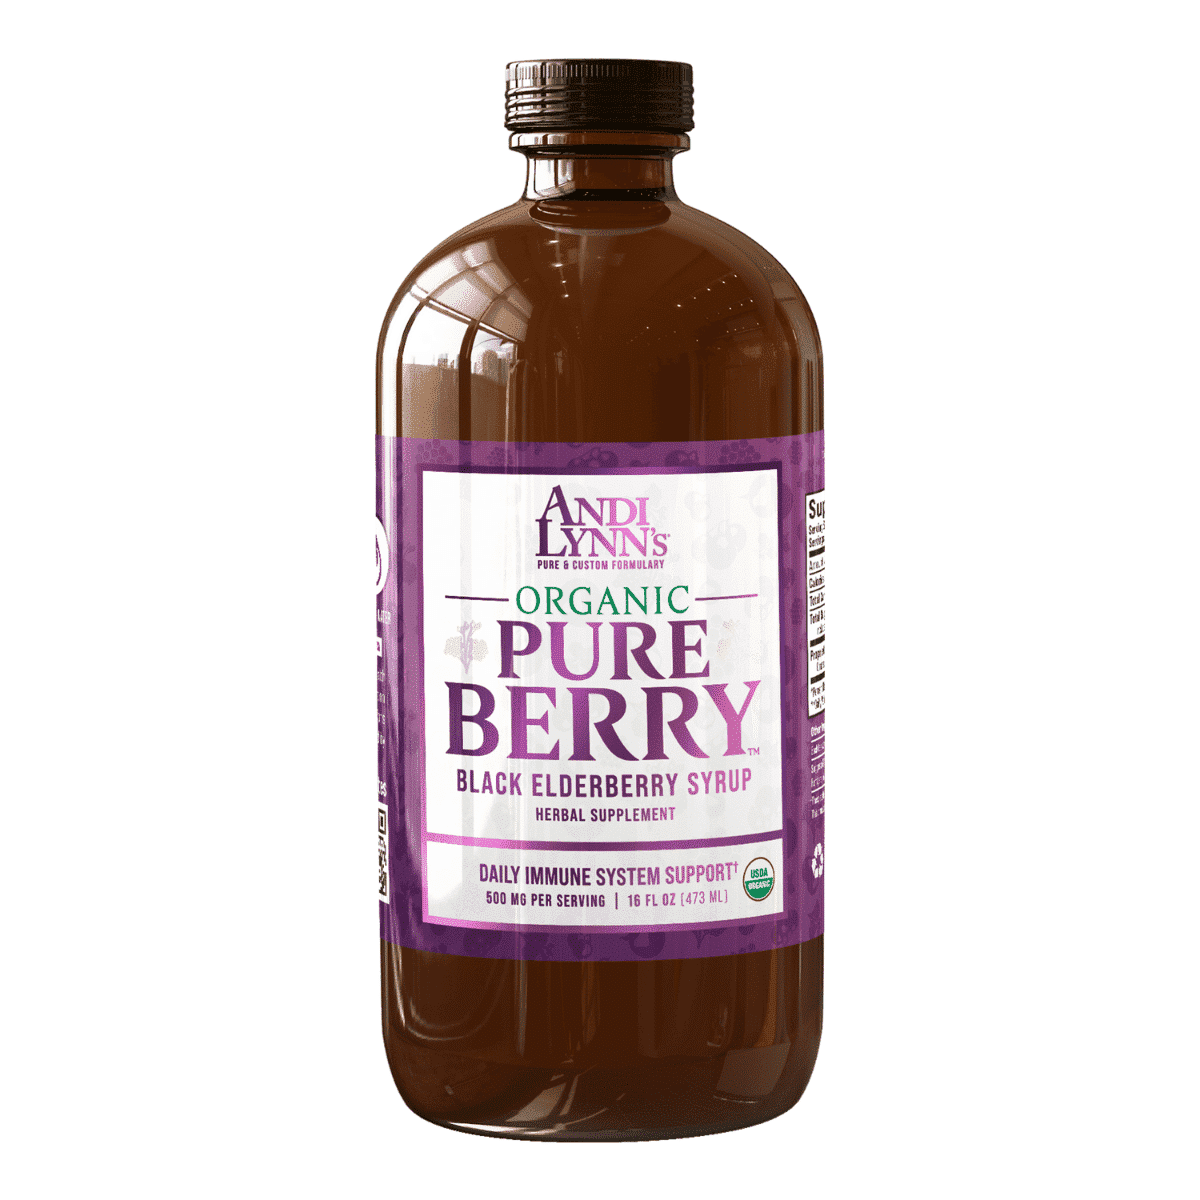 Andi Lynn Pure Black Elderberry Syrup from Gimme the Good Stuff